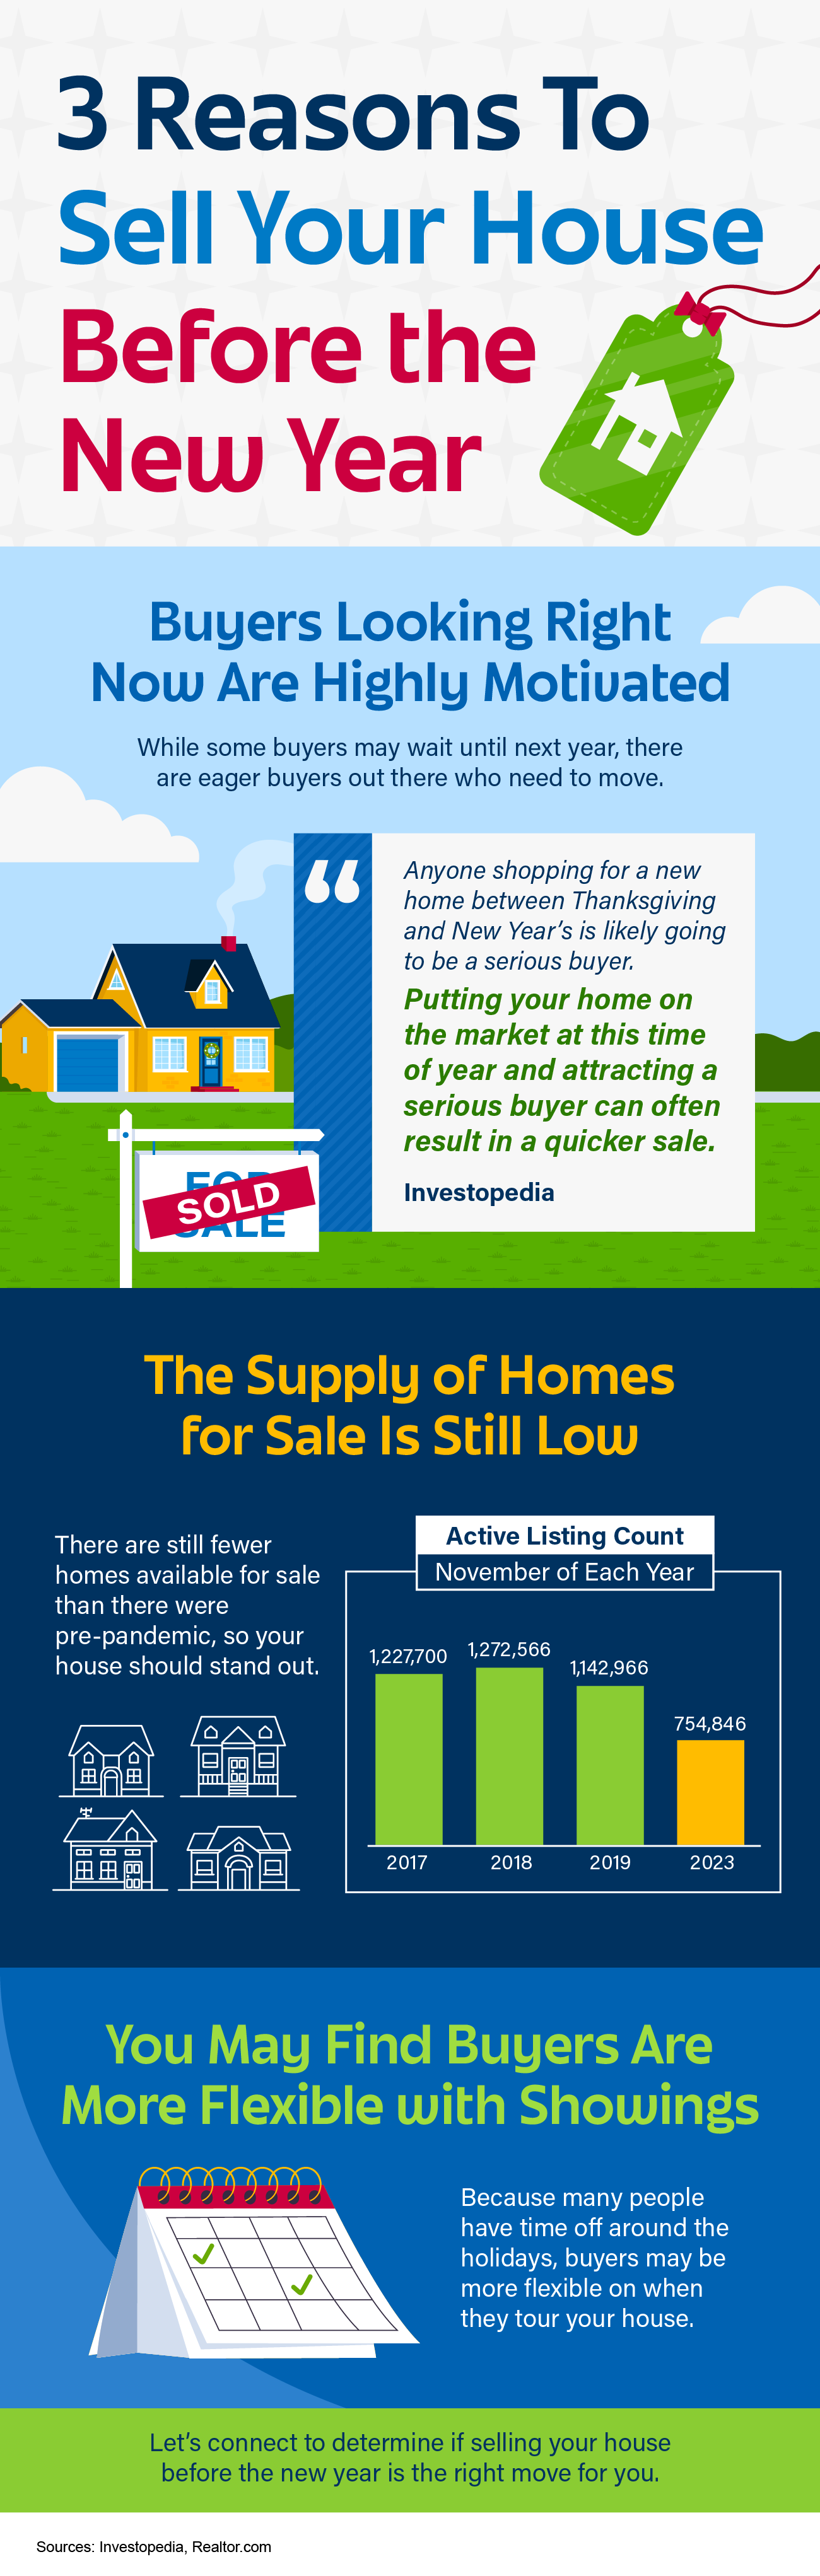 3-reasons-to-sell-your-house-before-the-new-year-infographic